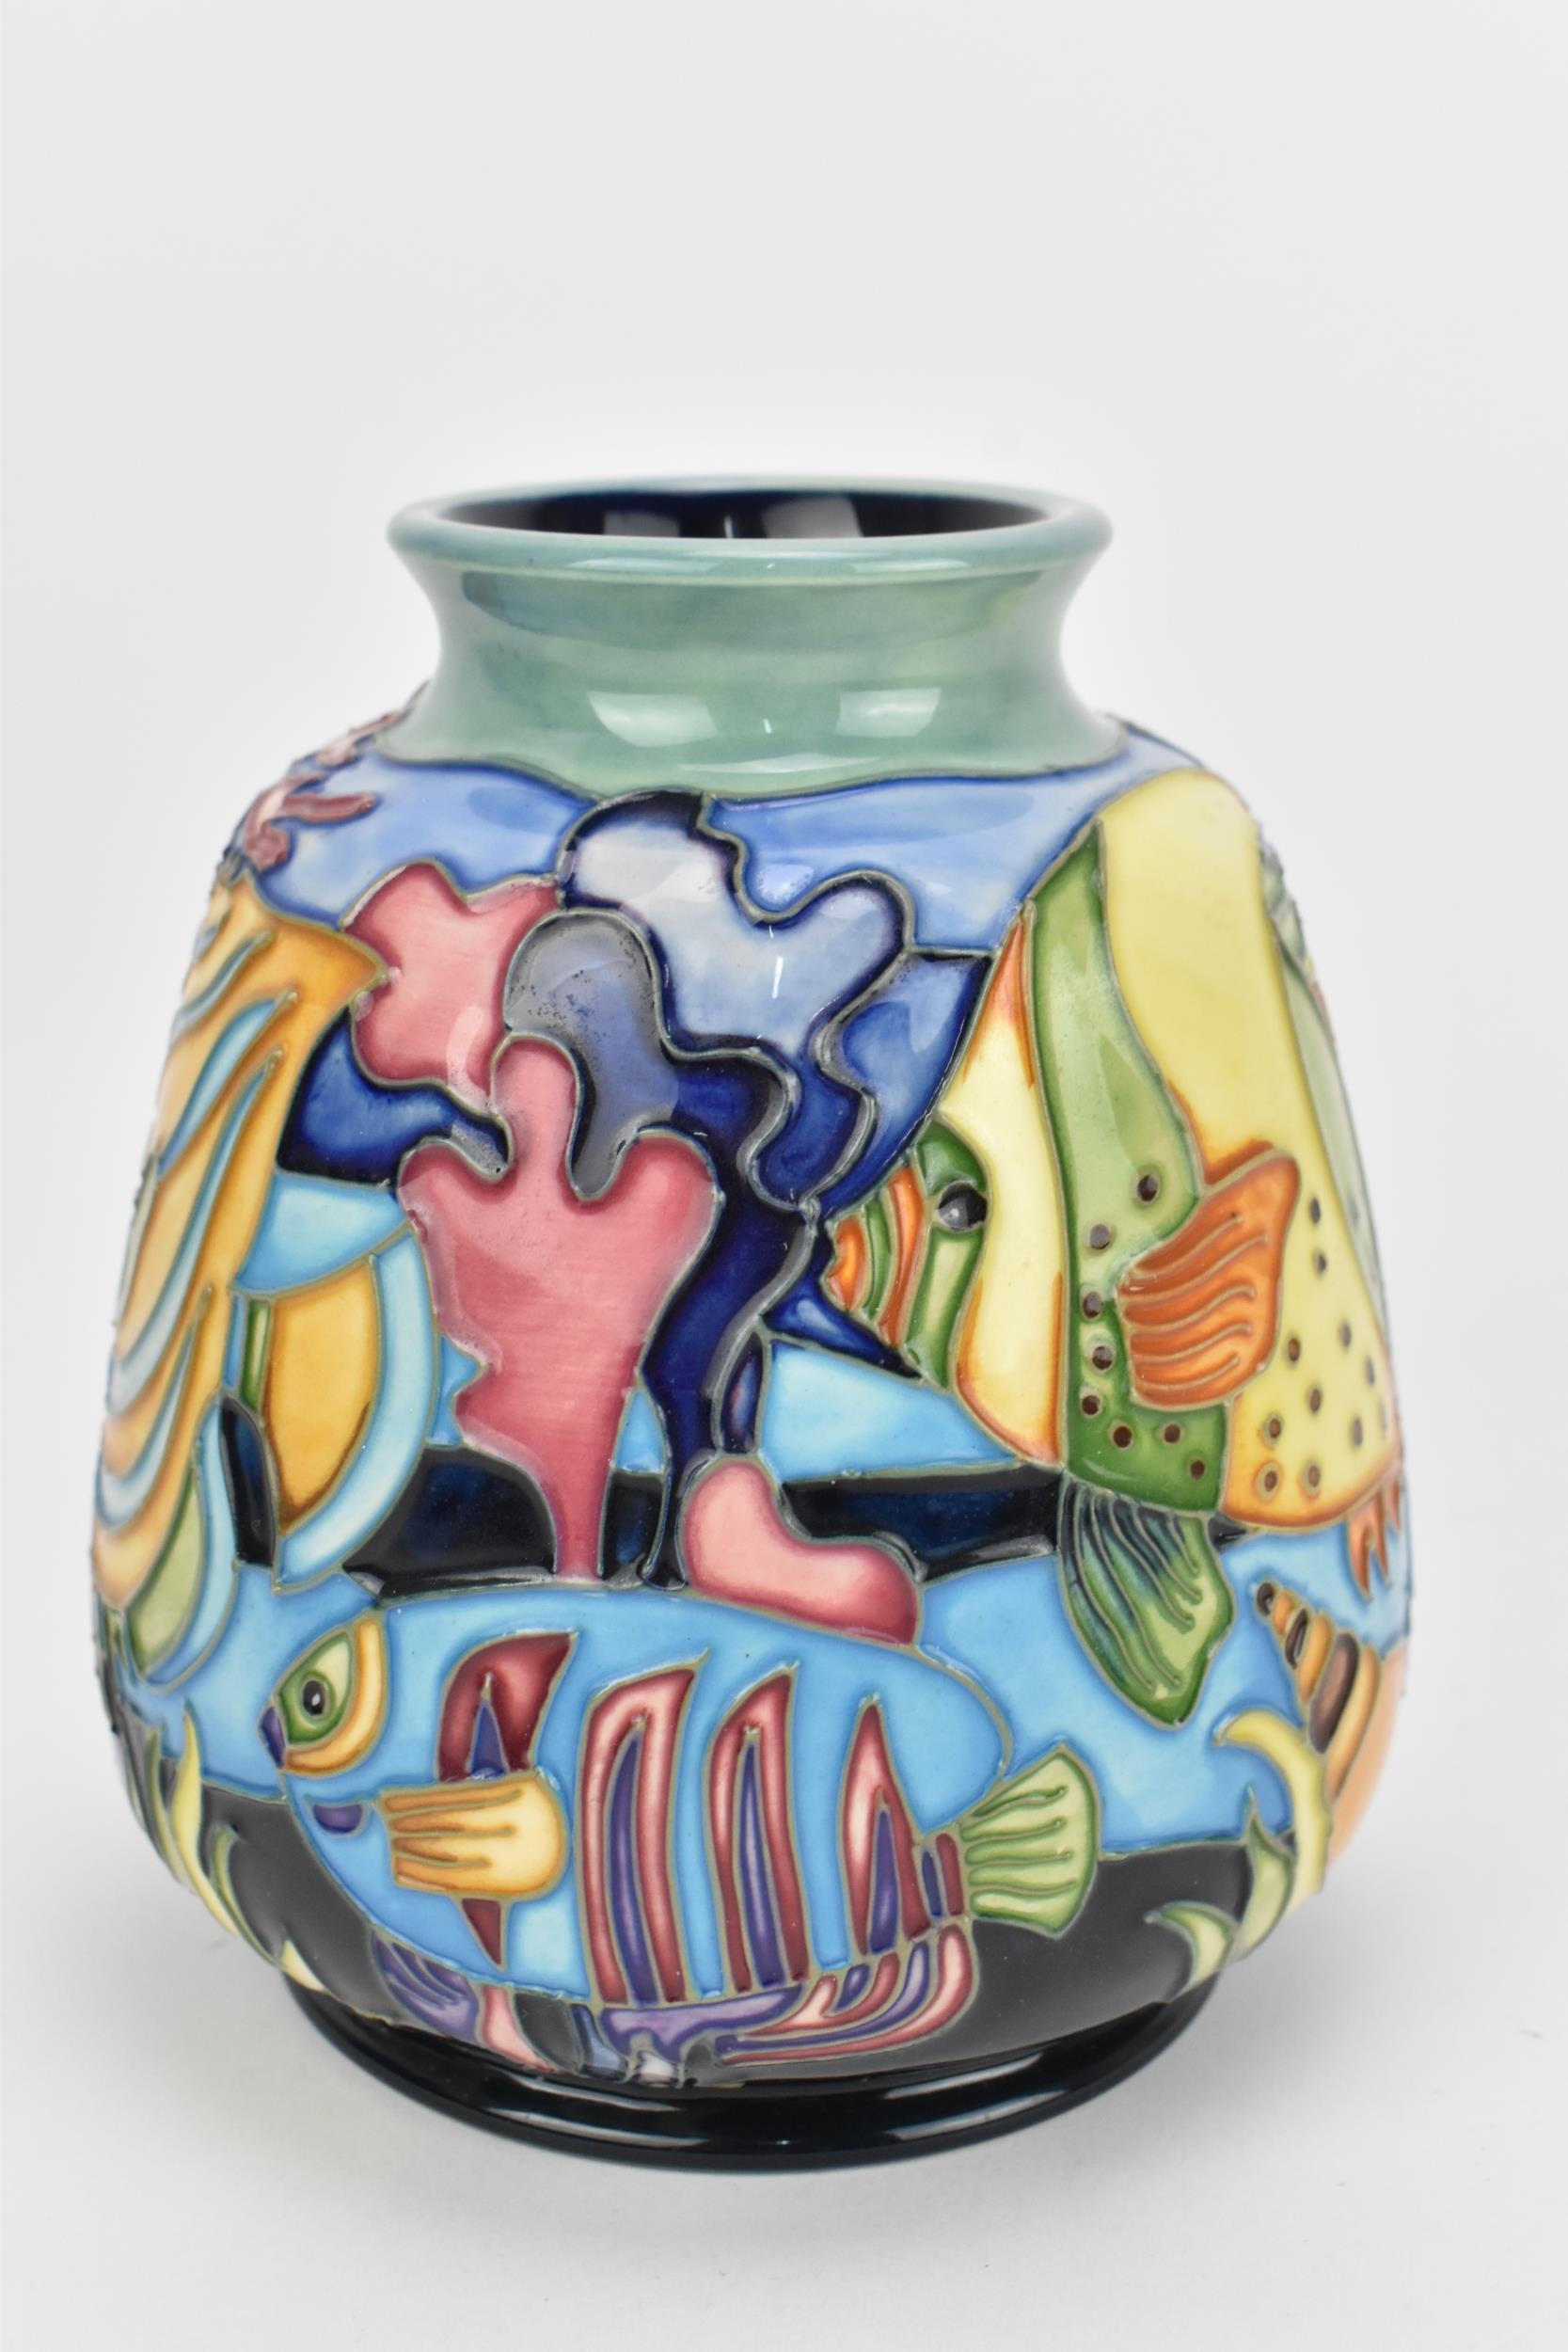 A Moorcroft Pottery vase in the 'Martinique' design by Jeanne McDougall, depicting coral reef - Image 4 of 5